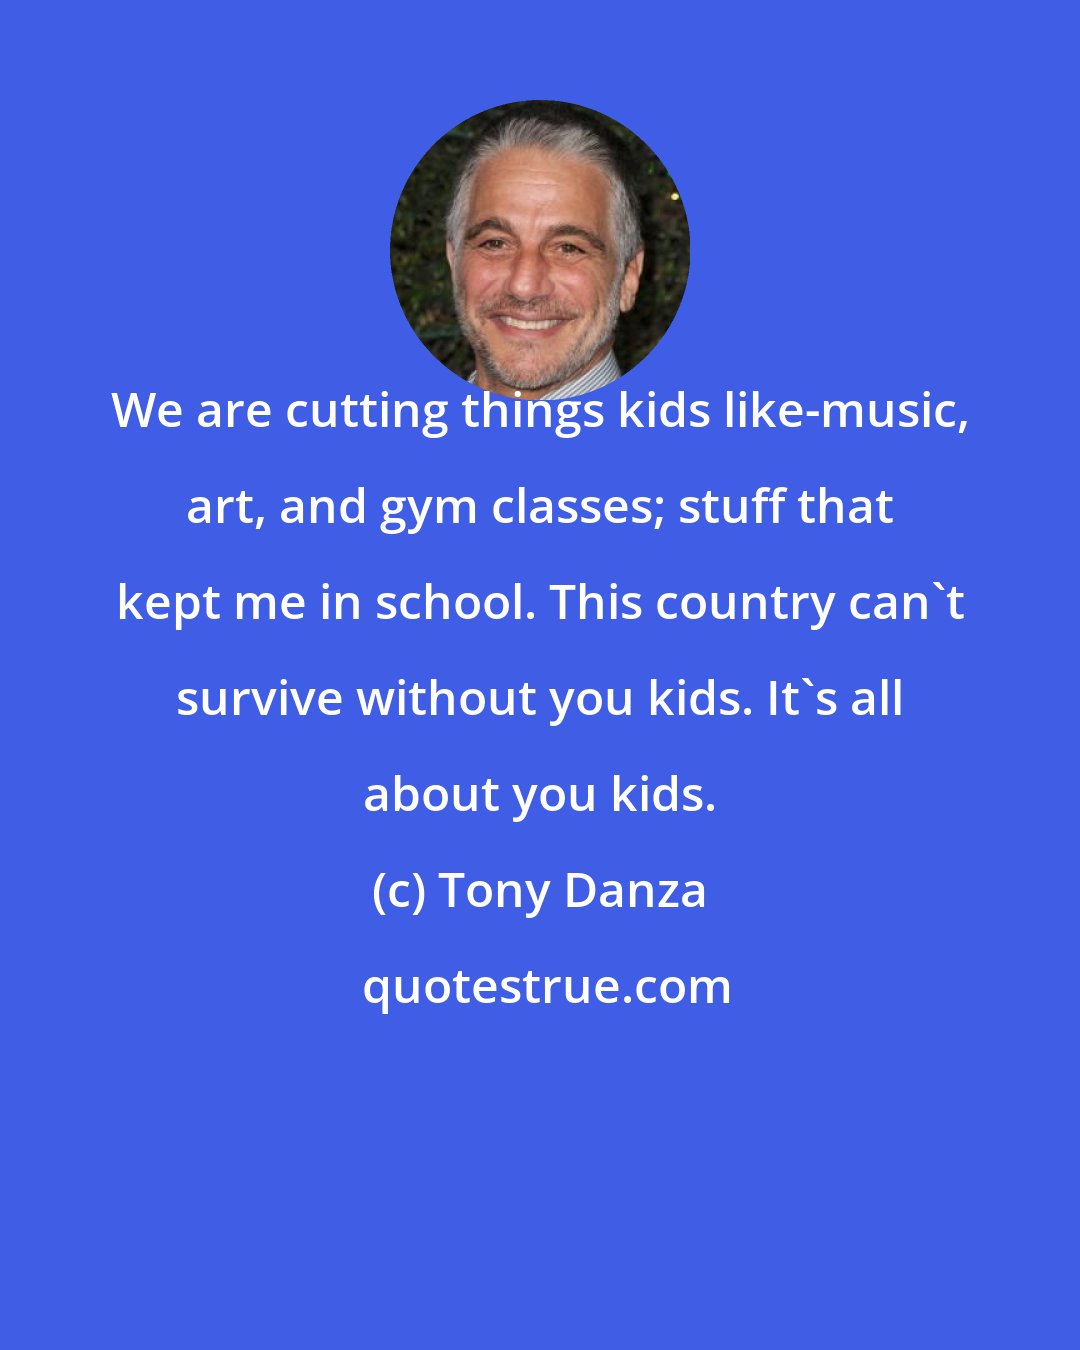 Tony Danza: We are cutting things kids like-music, art, and gym classes; stuff that kept me in school. This country can't survive without you kids. It's all about you kids.